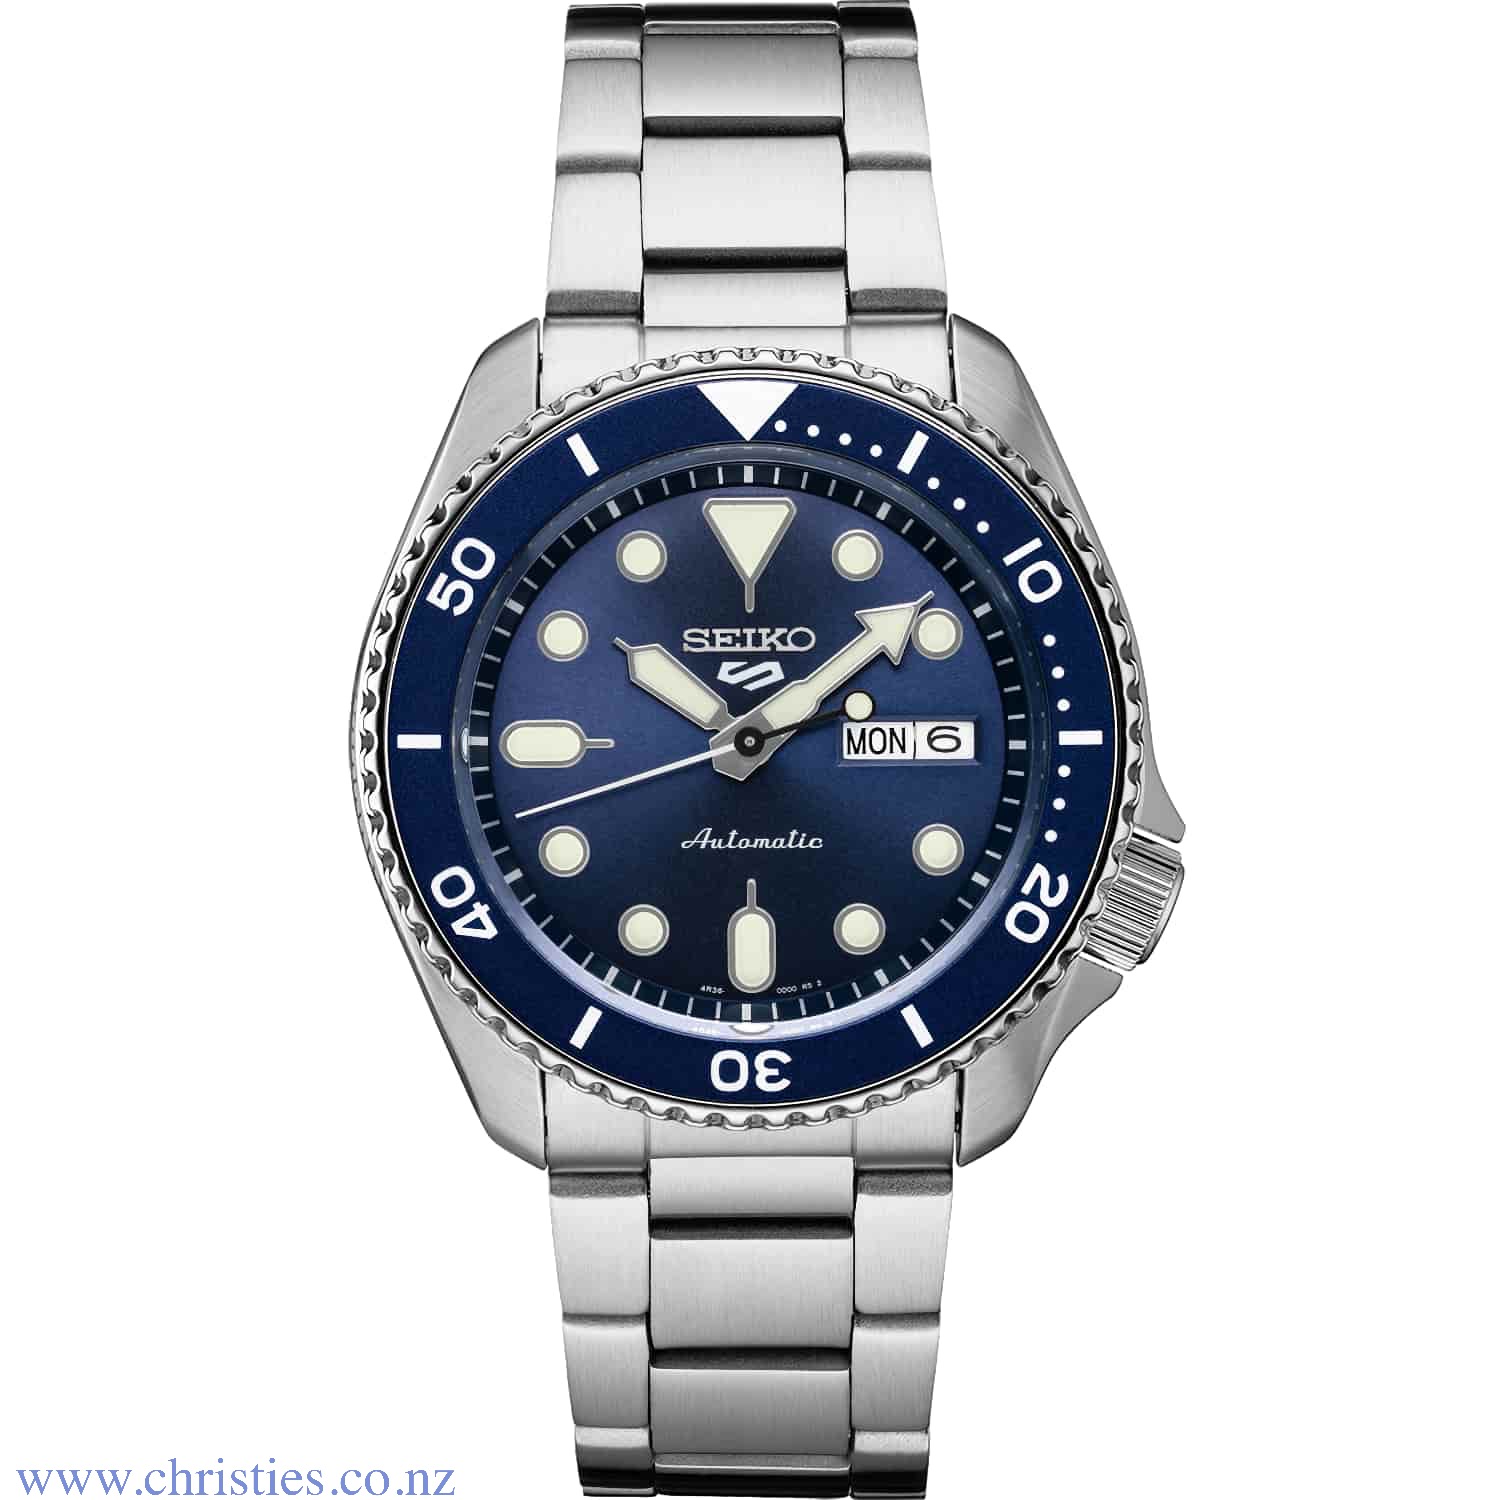 SRPD51K SEIKO 5 Automatic Sports Watch. Seiko 5 Sports Mens Stainless Steel Case and Bracelet Automatic Movement Watch SRPD51K.   LAYBUY - Pay it easy, in 6 weekly payments and have it now. Only pay the price of your purchase, when you pay yo @christies.o